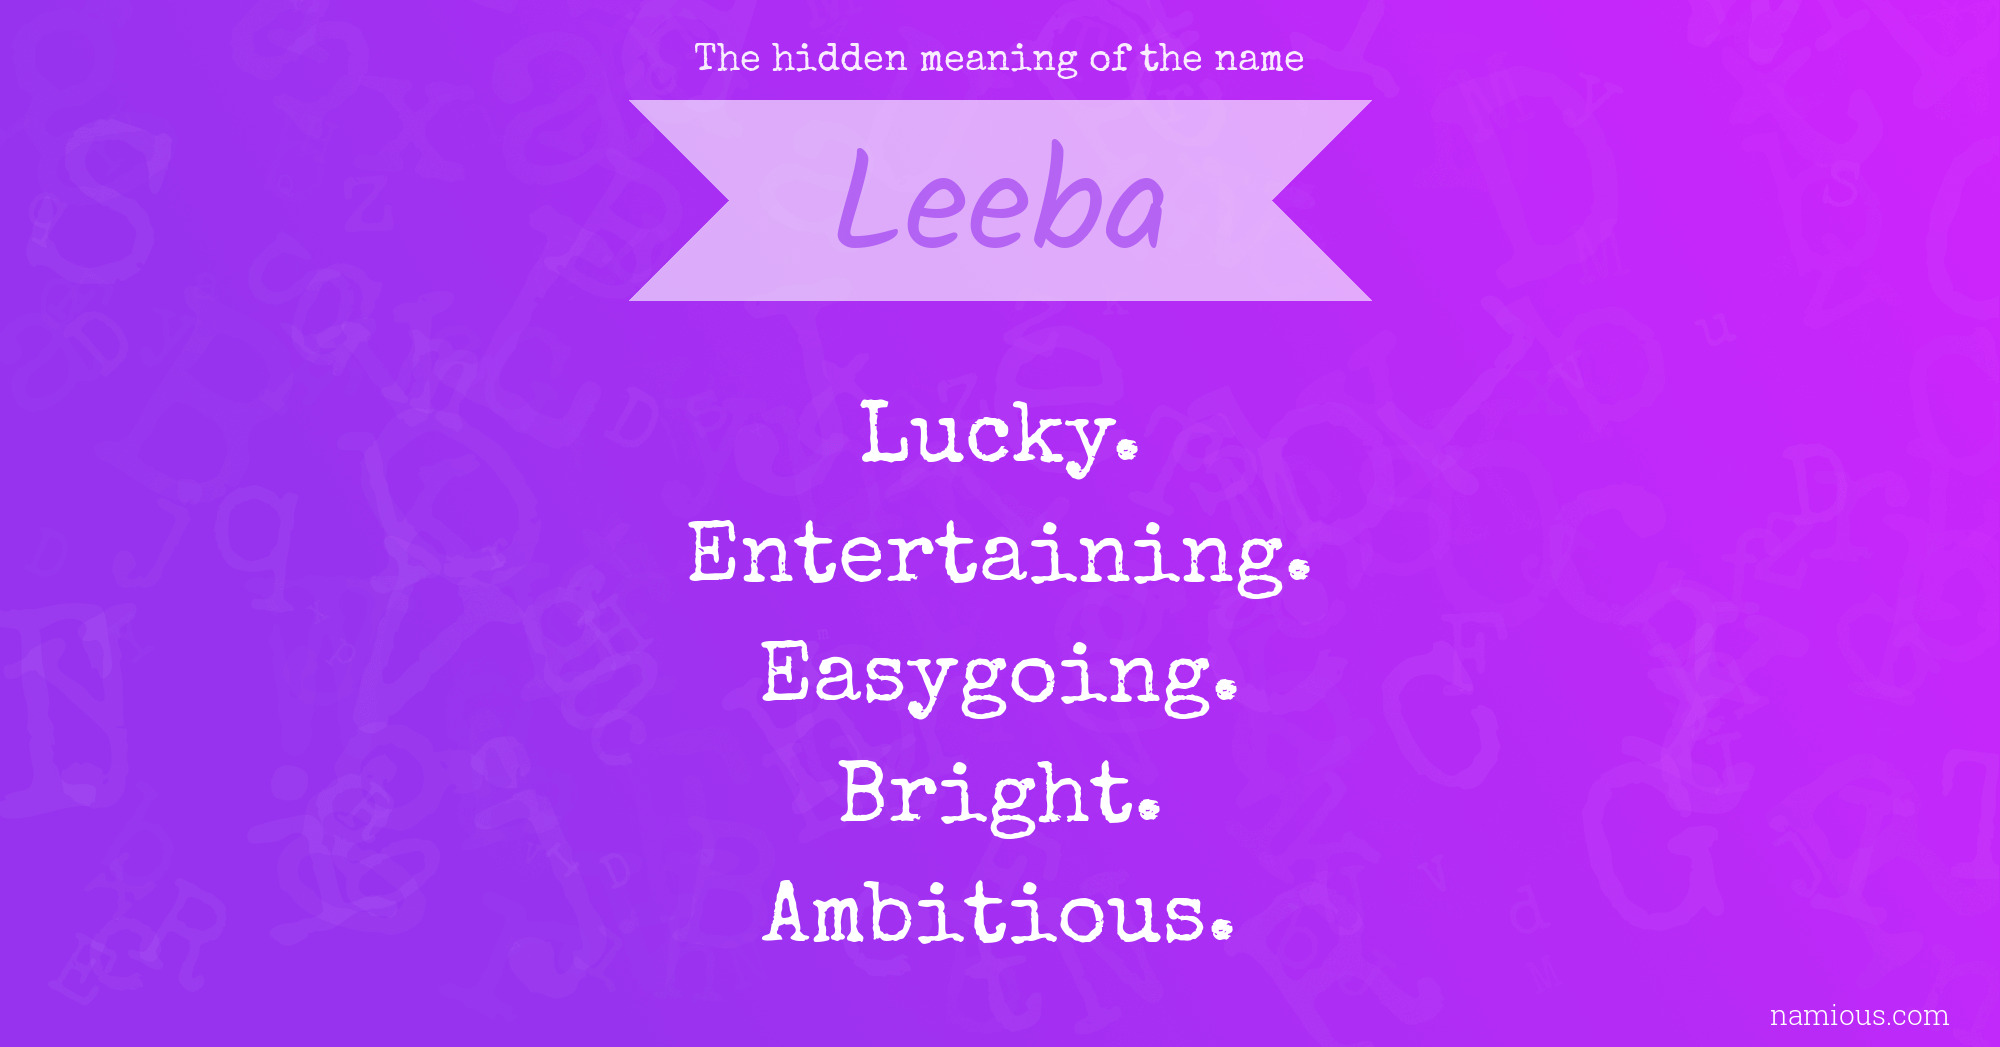 The hidden meaning of the name Leeba